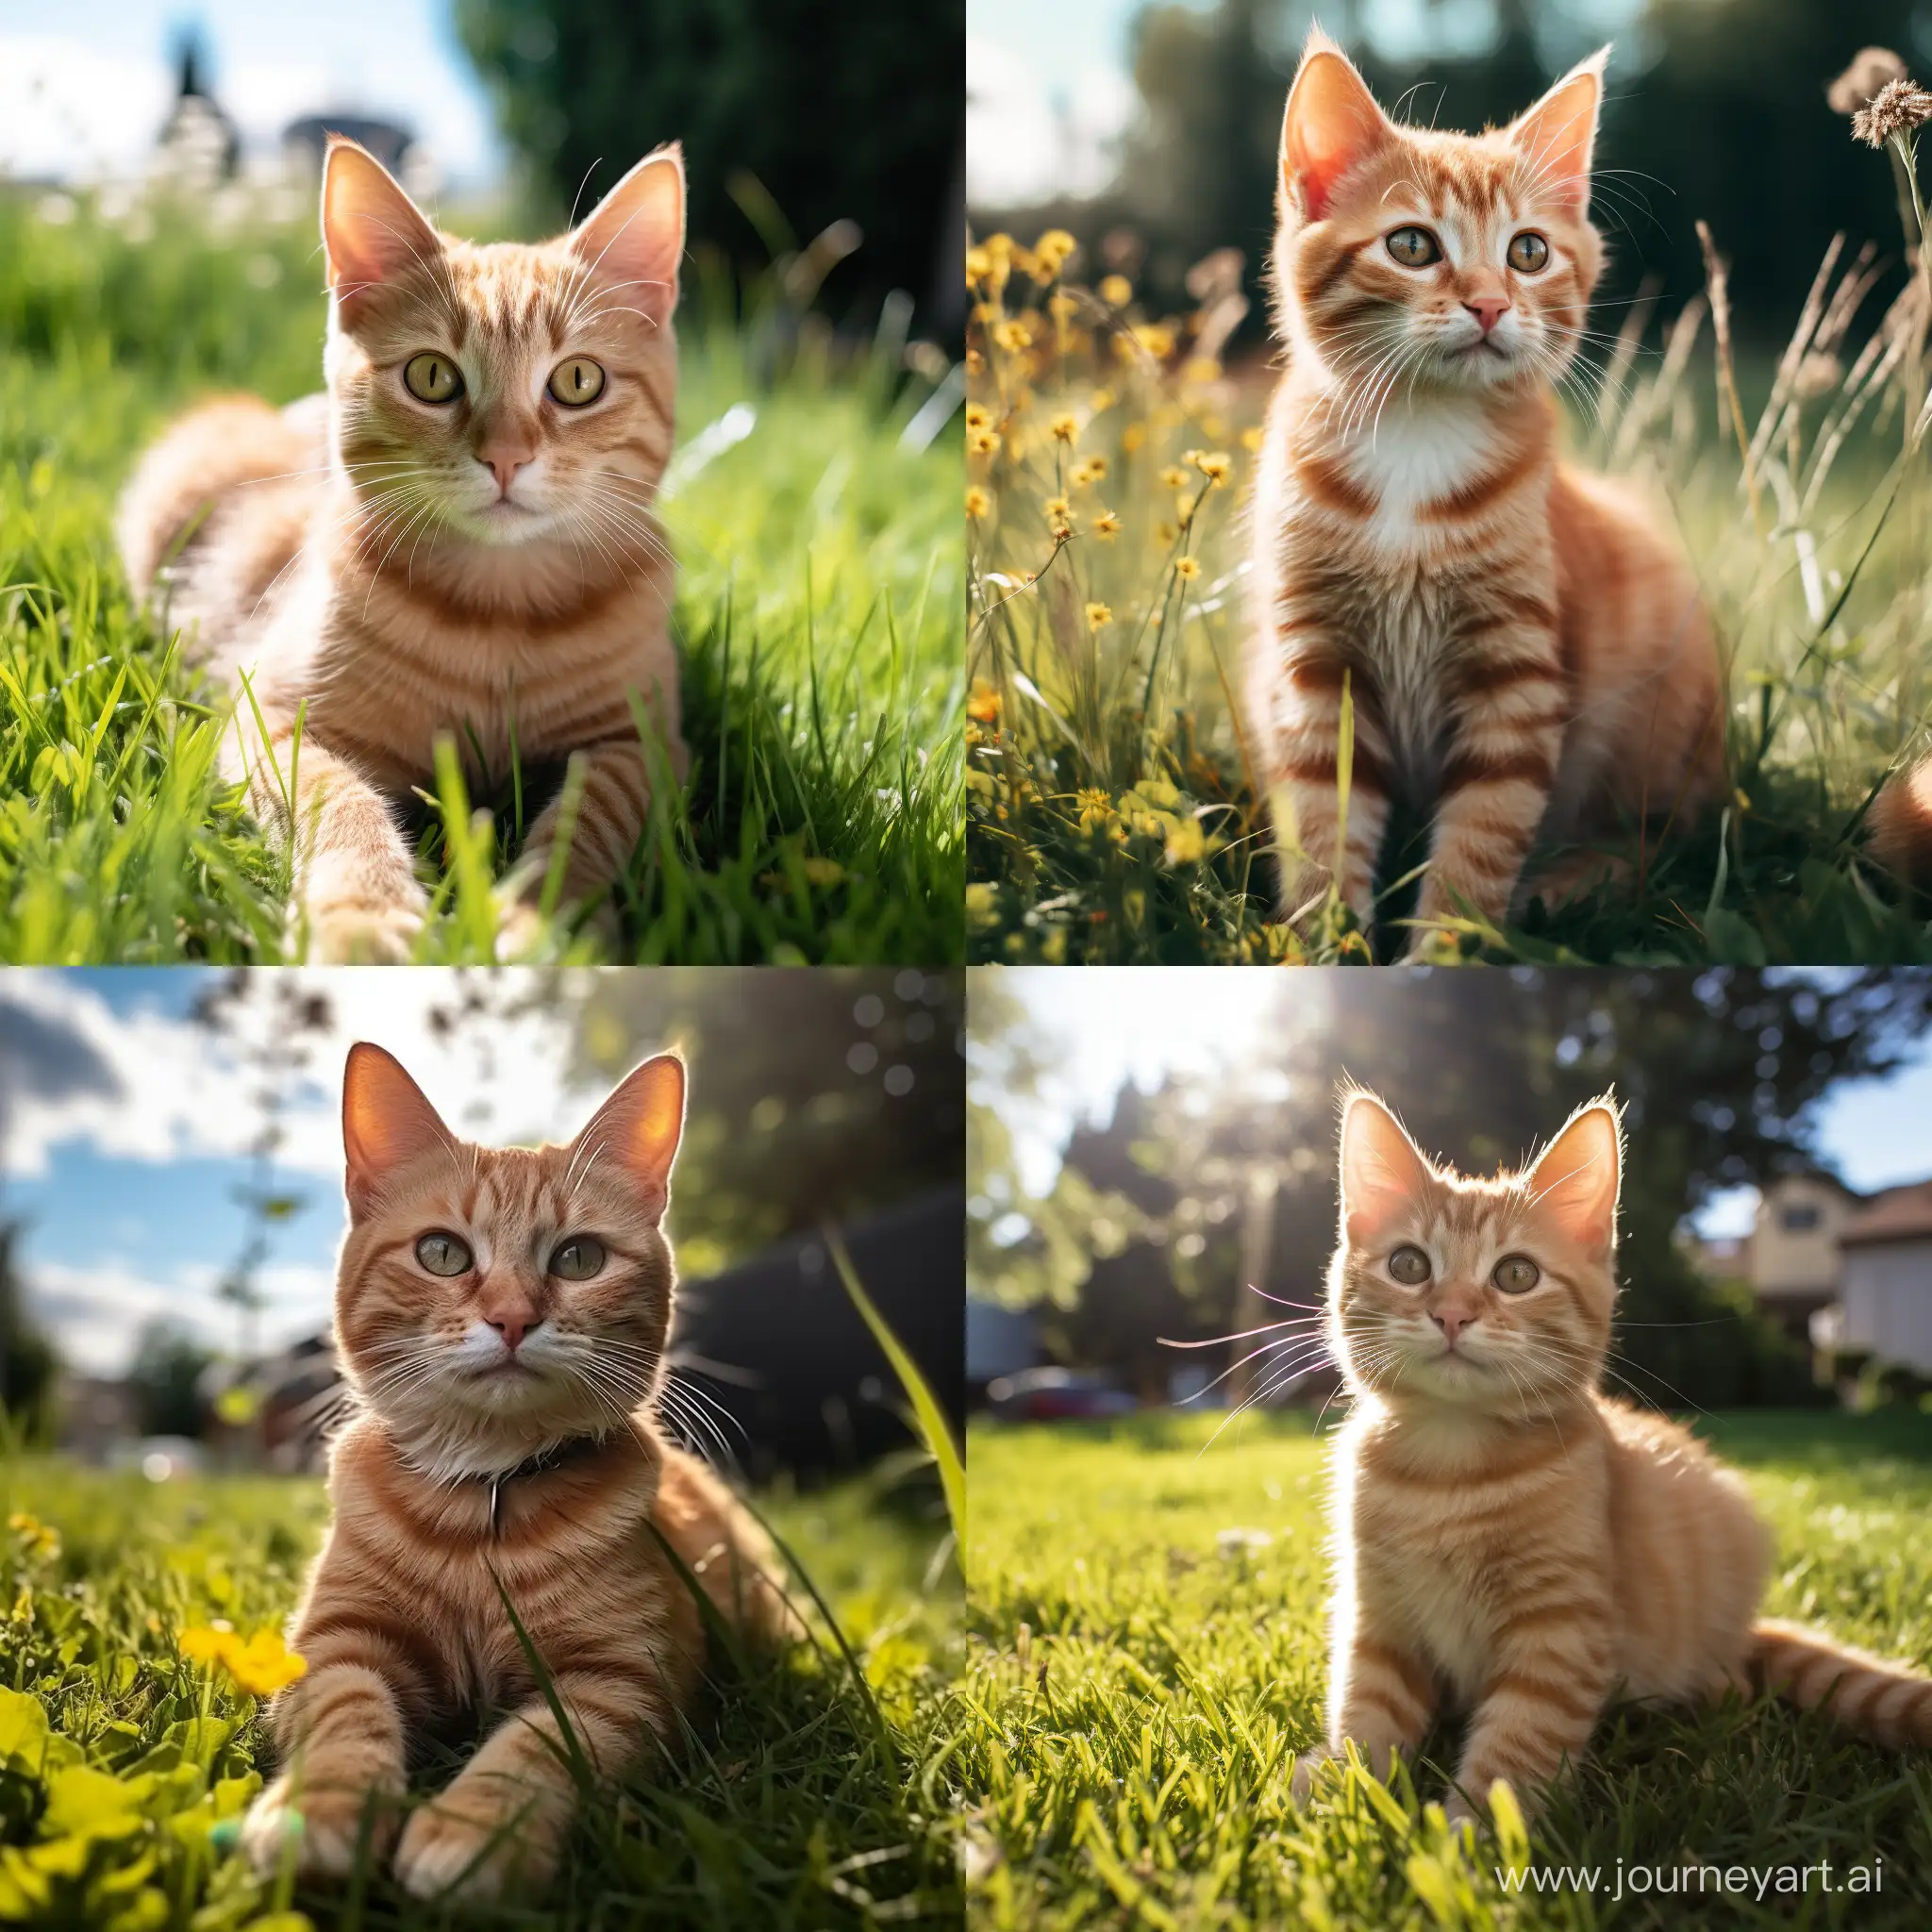 A photo of a orange tabby cat sitting on the grass